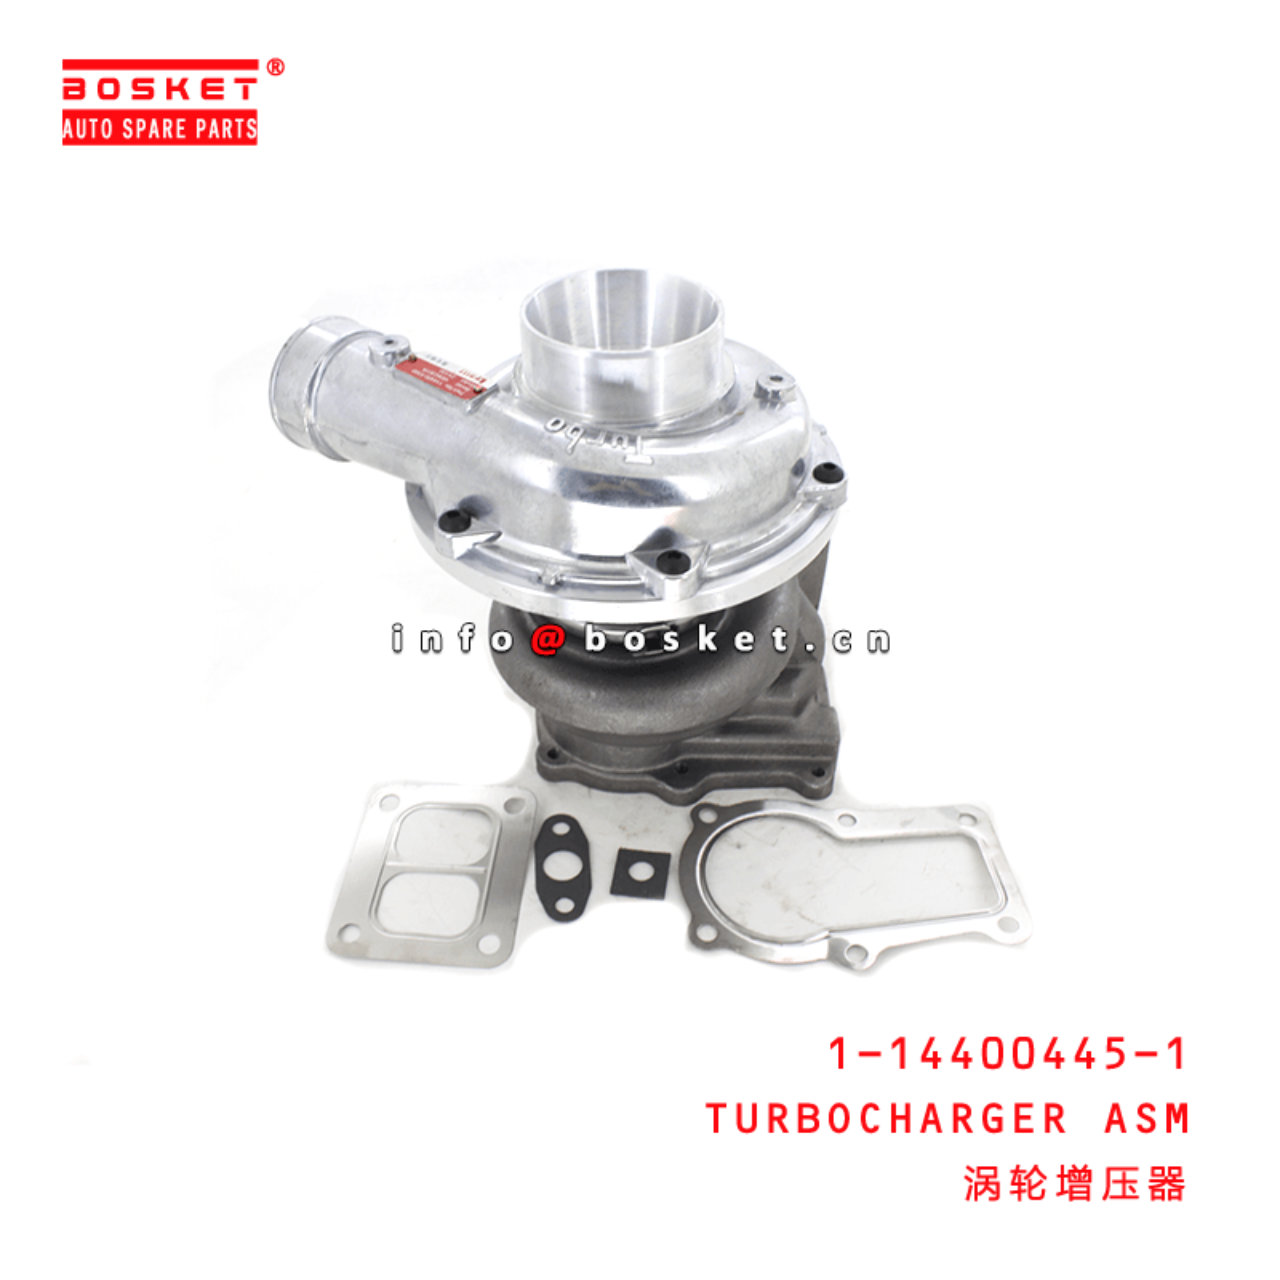  1-14400445-1 Turbocharger Assembly 1144004451 Suitable for ISUZU XE 6HK1